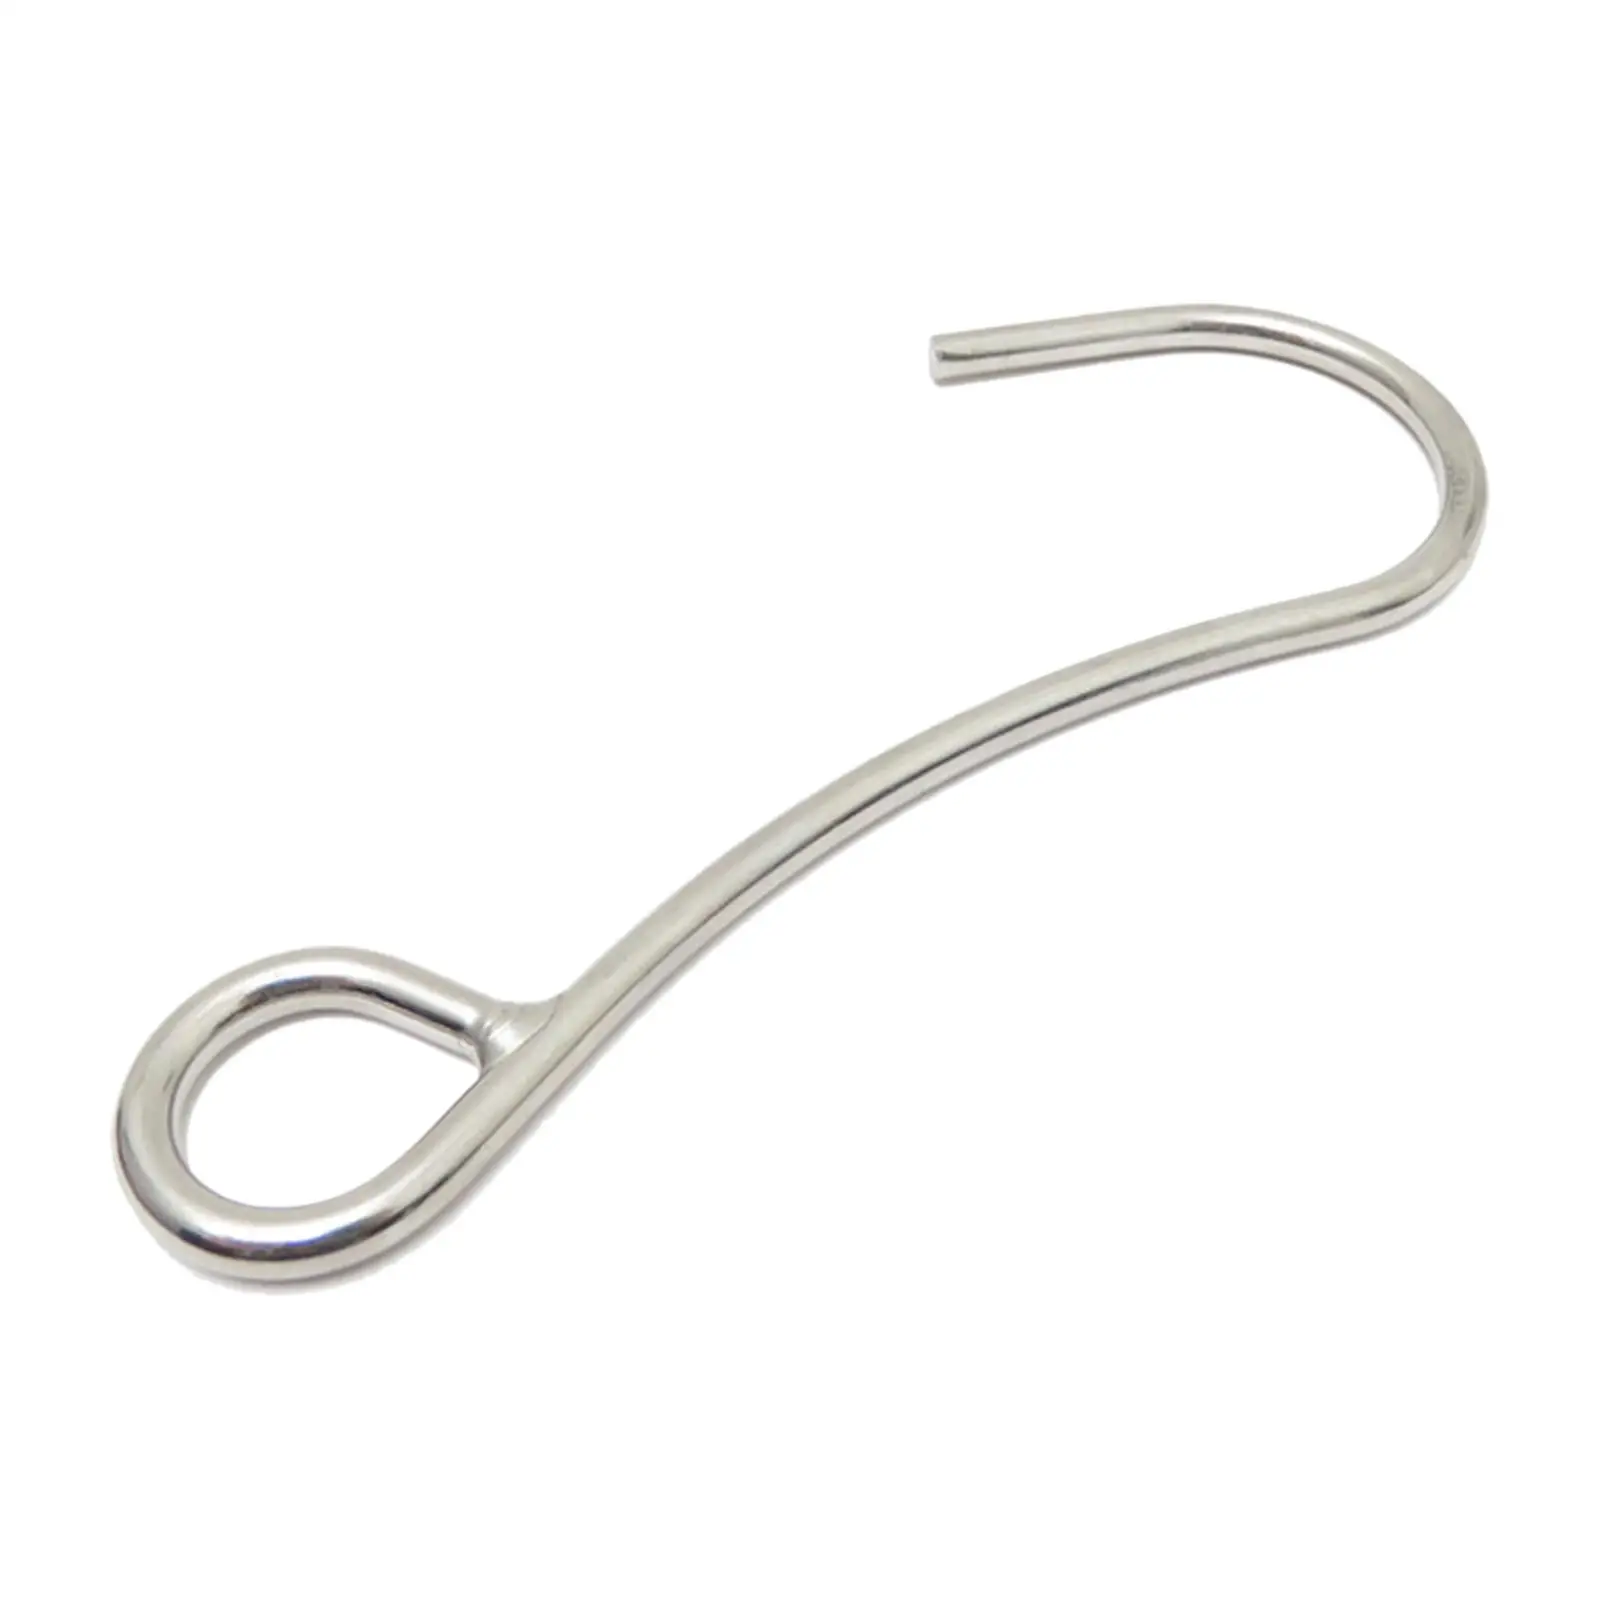 

Scuba Diving Reef Hook Lightweight Dive Current Single Hook for Cave Diving Underwater Safety Equipment Lake Adventure Diver